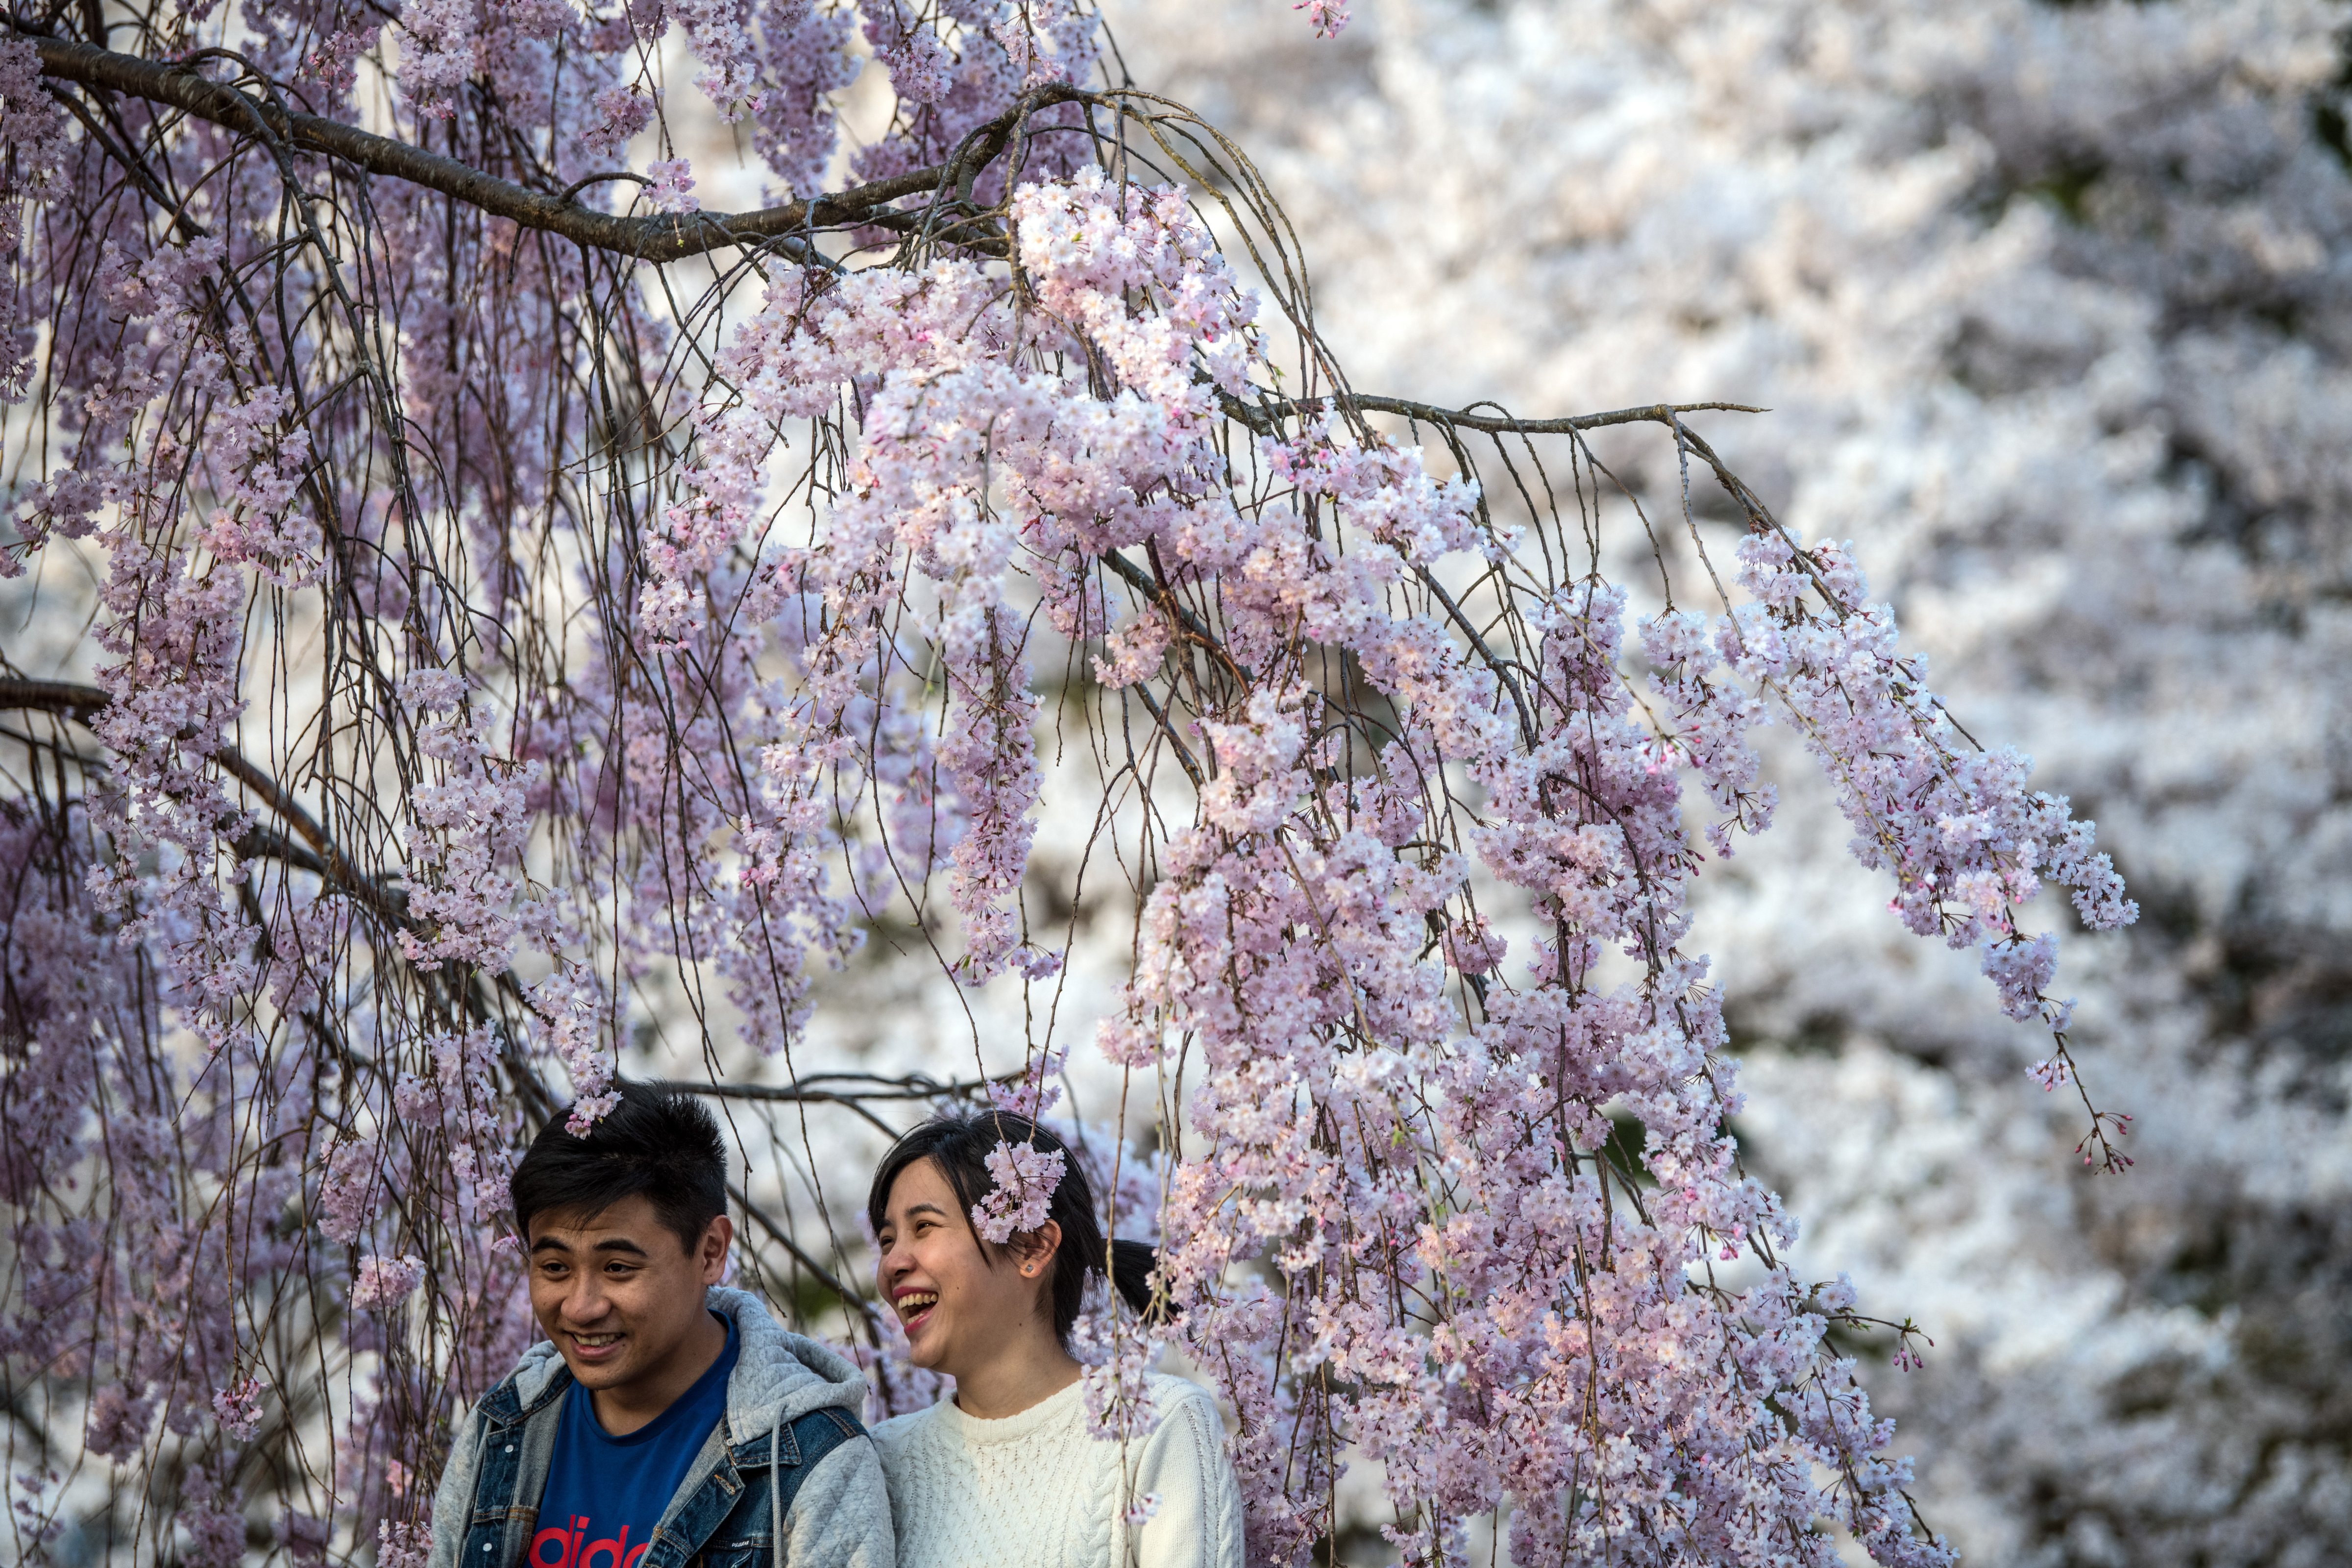 A couple pose for a photograph under a cherry blossom tree in Kameoka, Japan on April 2, 2018. (Carl Court—Getty Images)